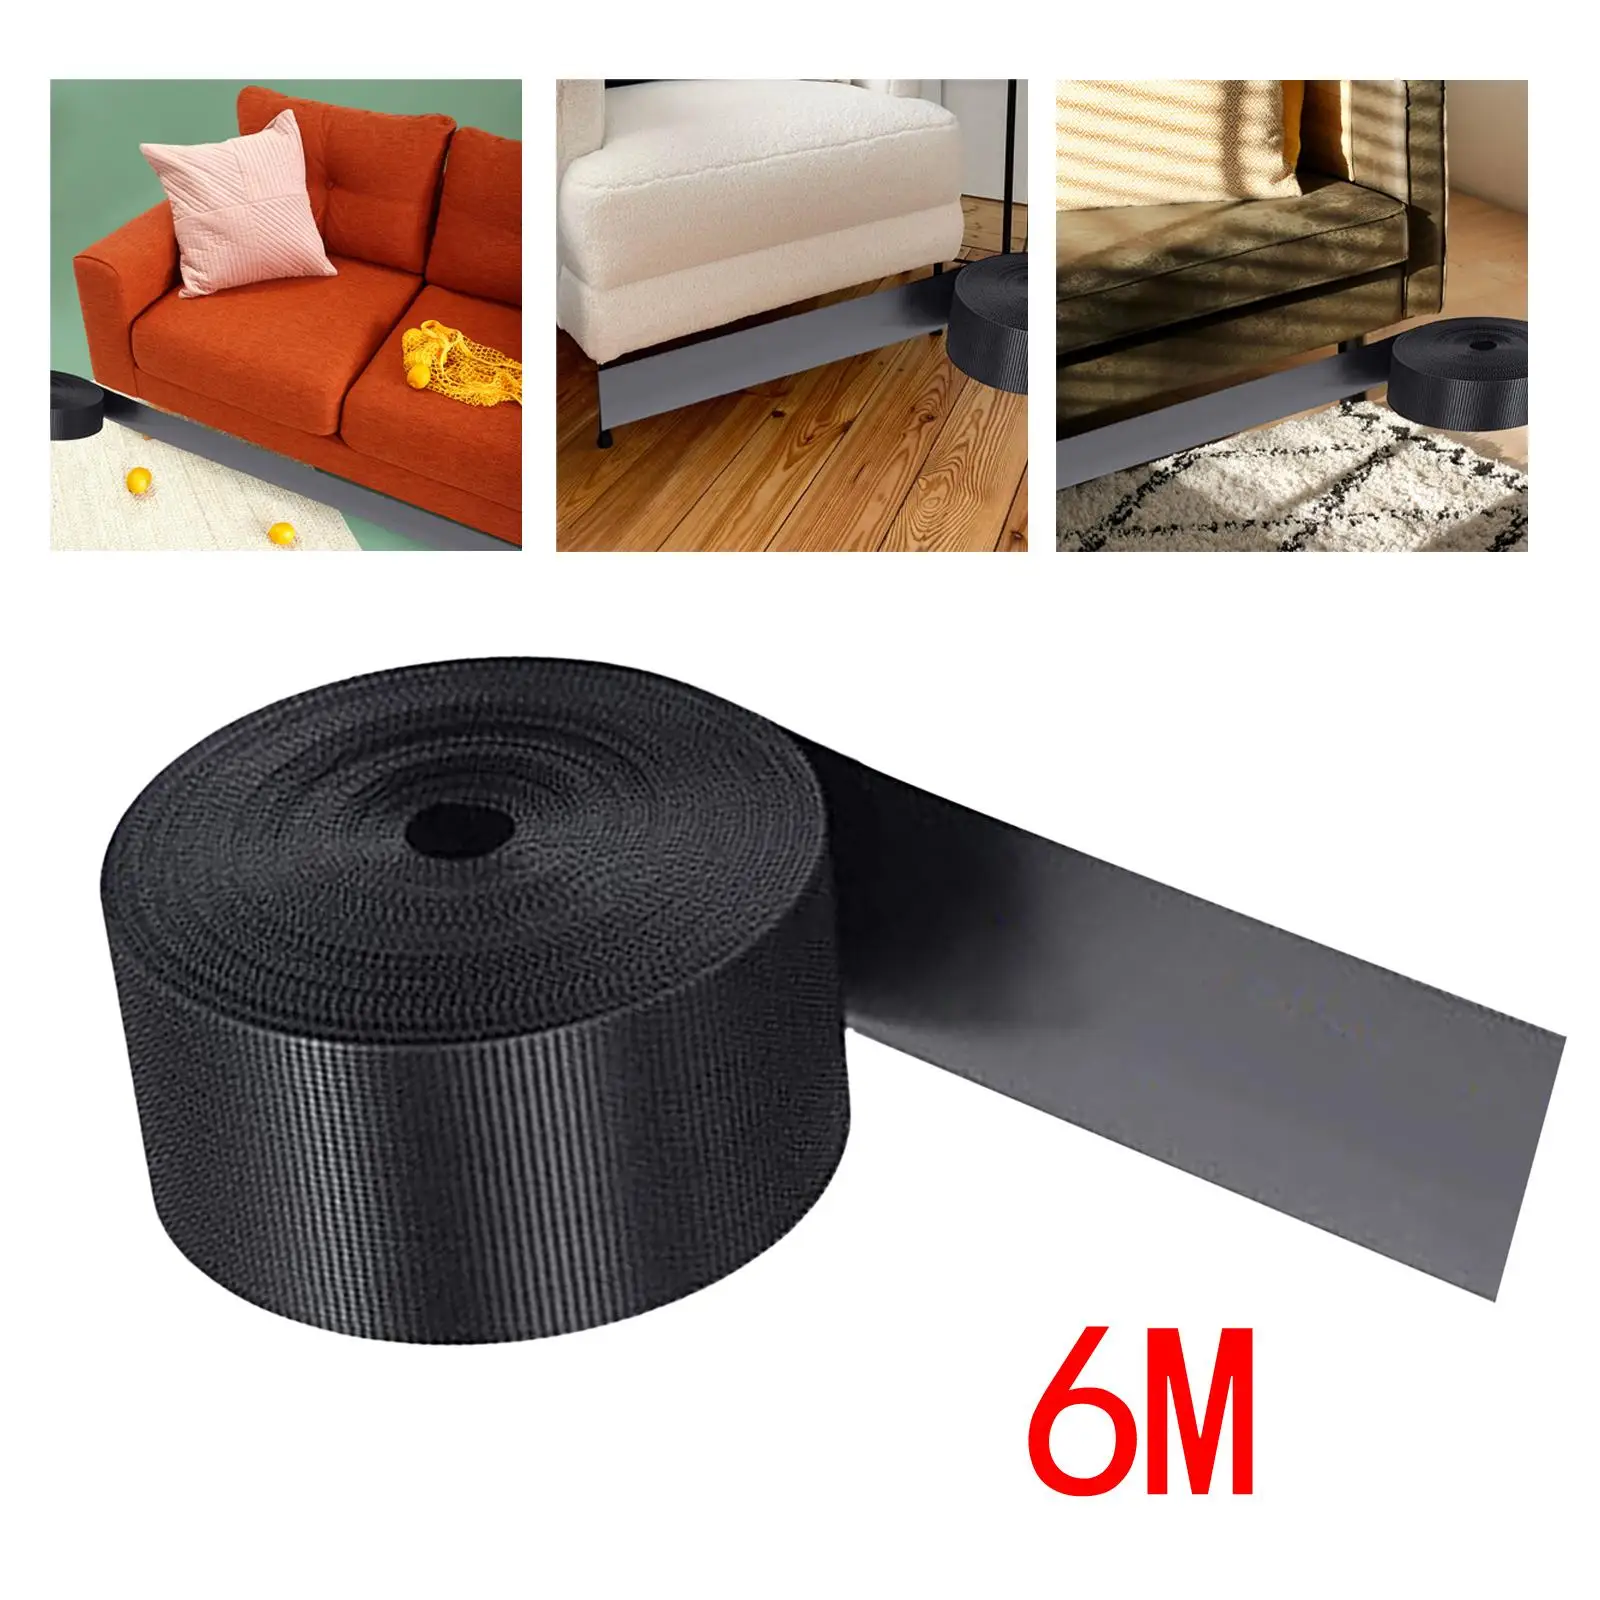 2Pcs Sofa Toy Bumper with Mounting Strap Sectional Connector Bumper Guard Under Sofa Barrier for Home Furniture Sofa Bed Couch